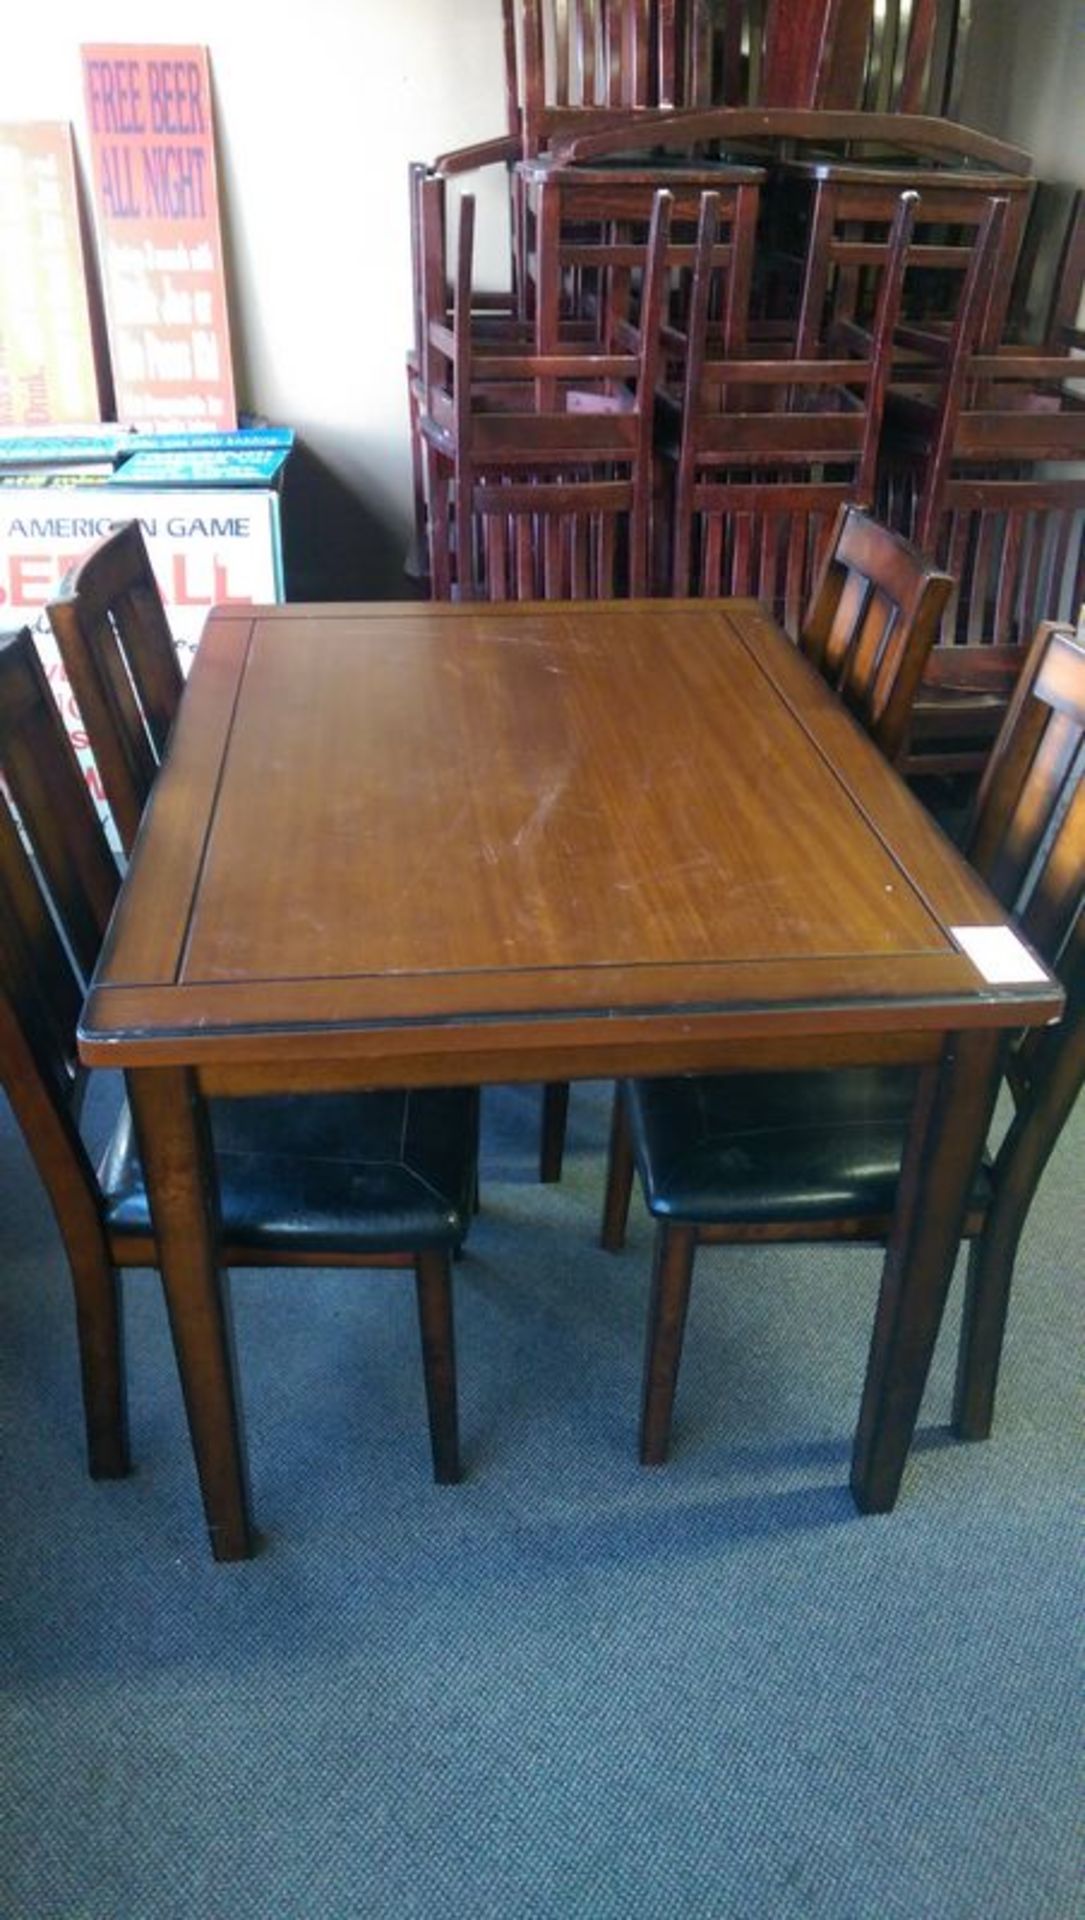 1 Wooden table with 4 padded chairs